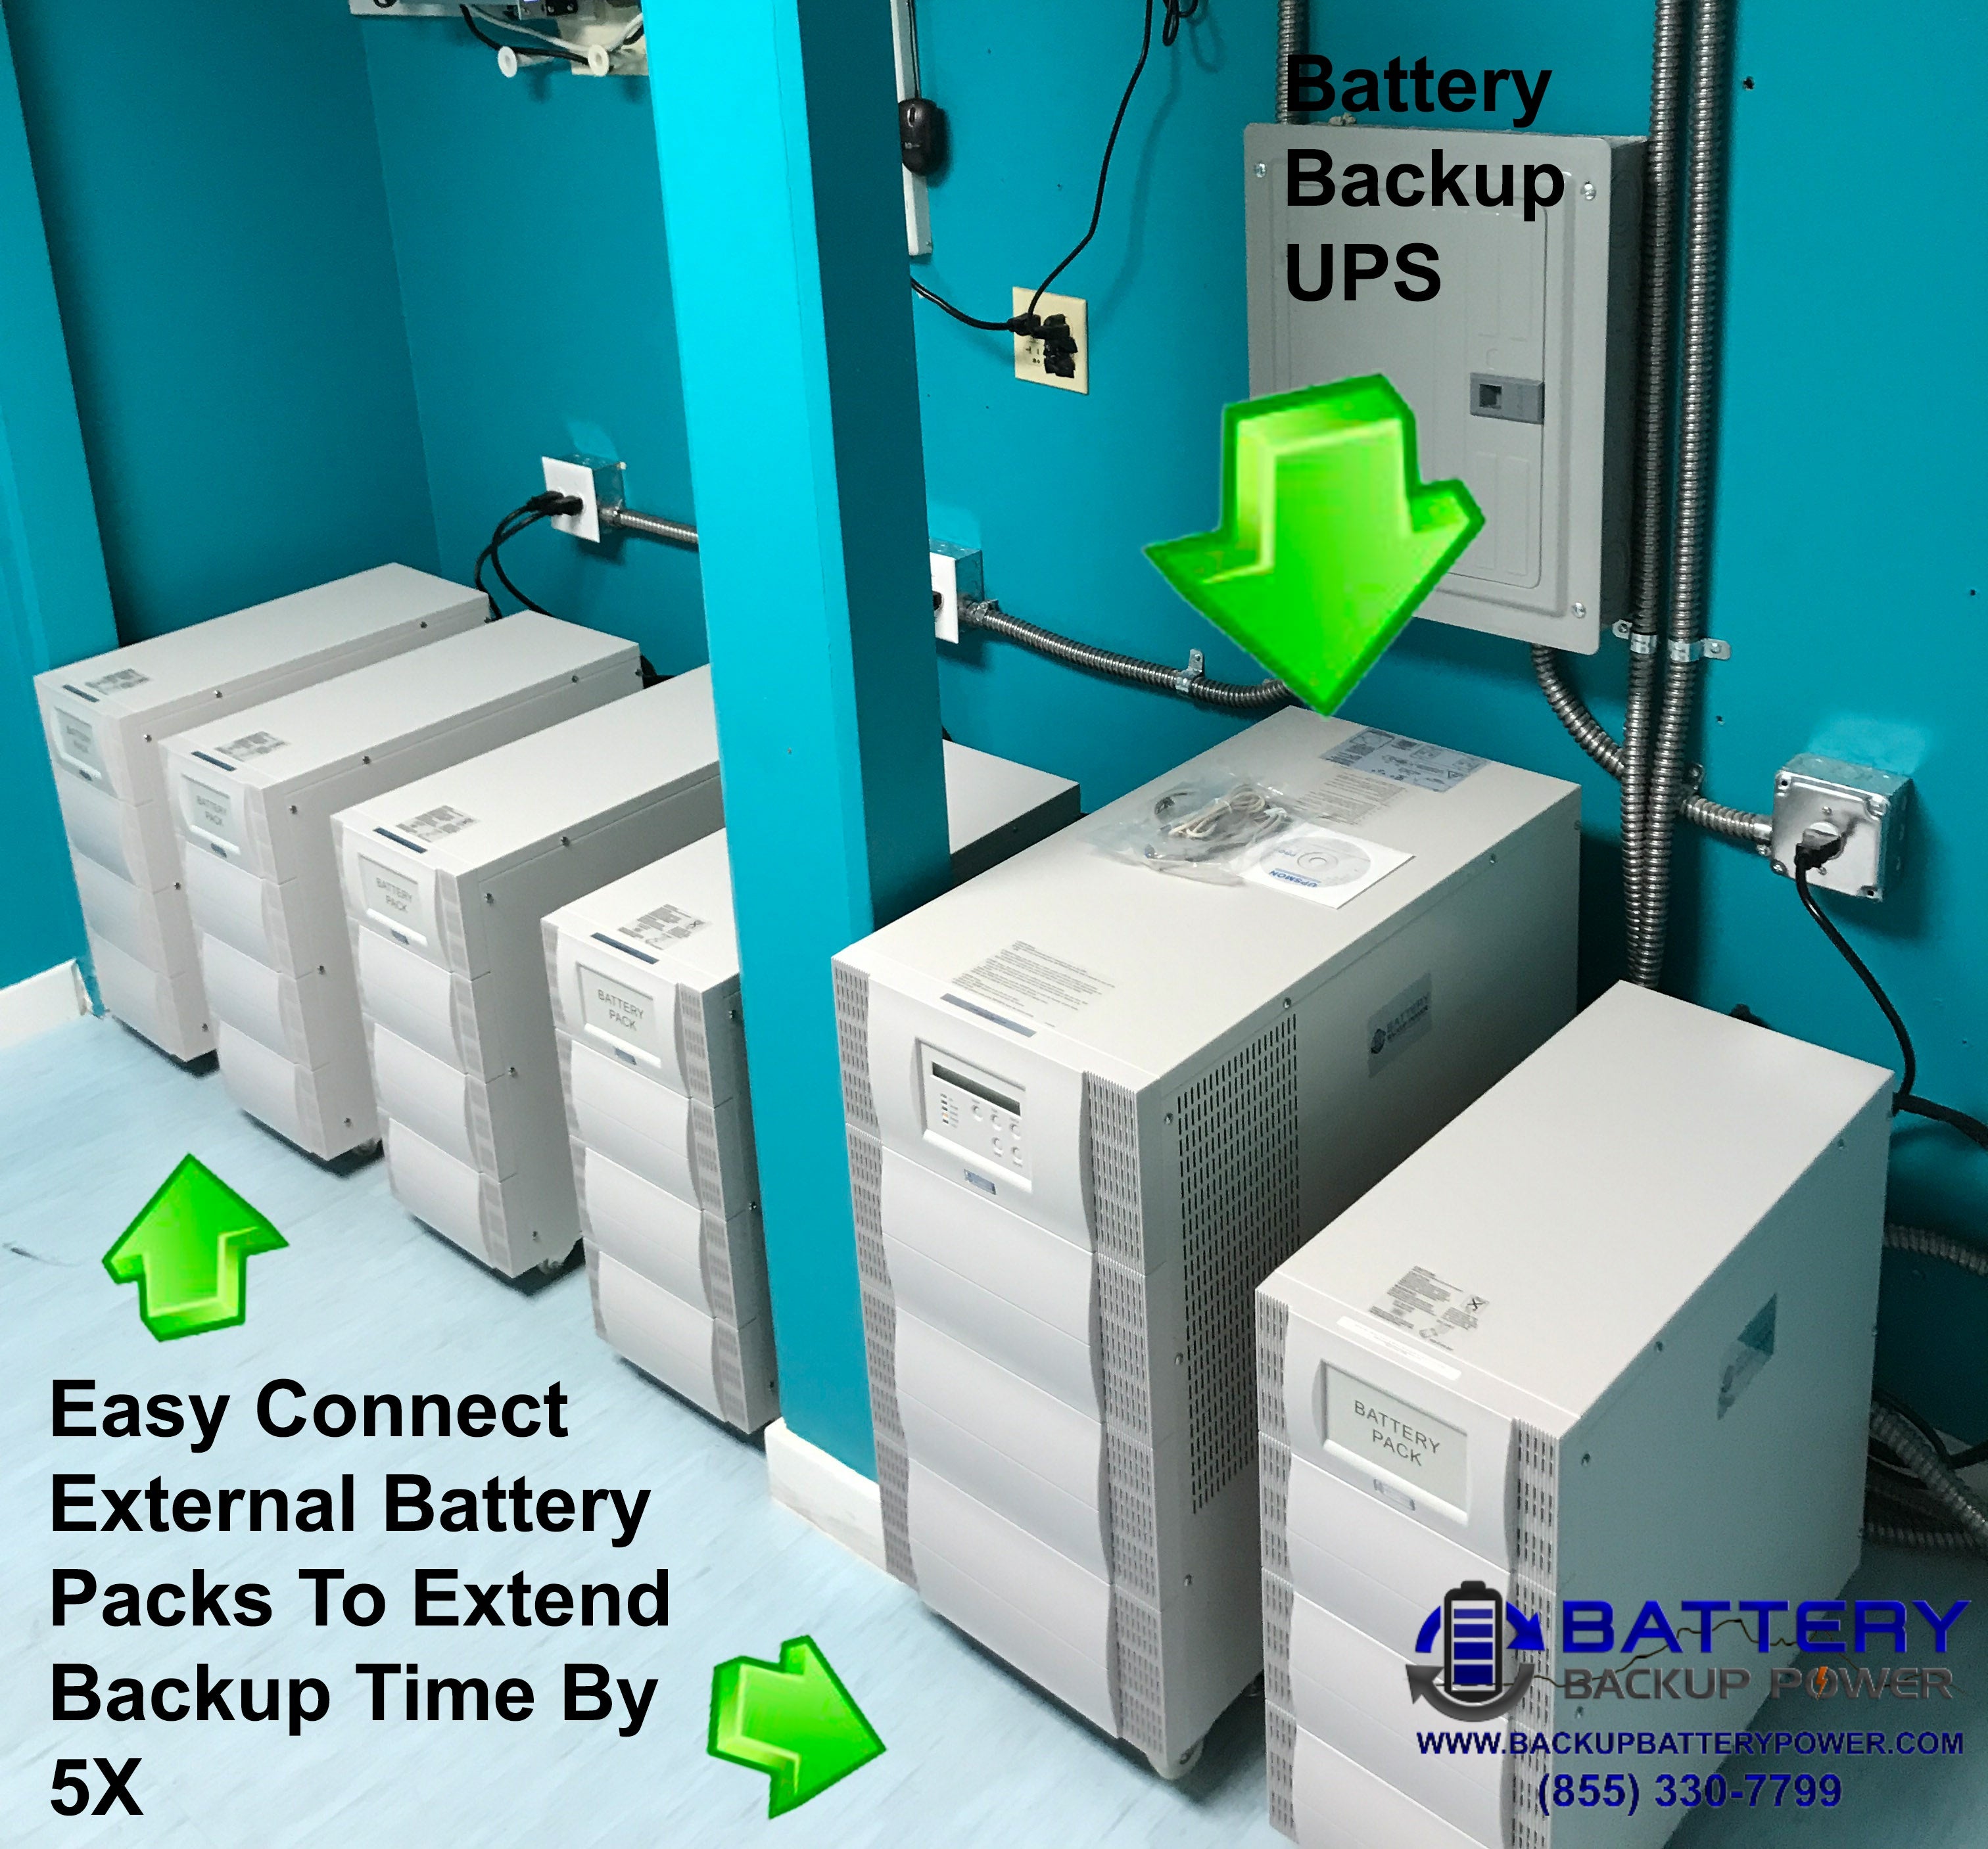 Expandable Battery Backup Systems Are Replacing Generators As The